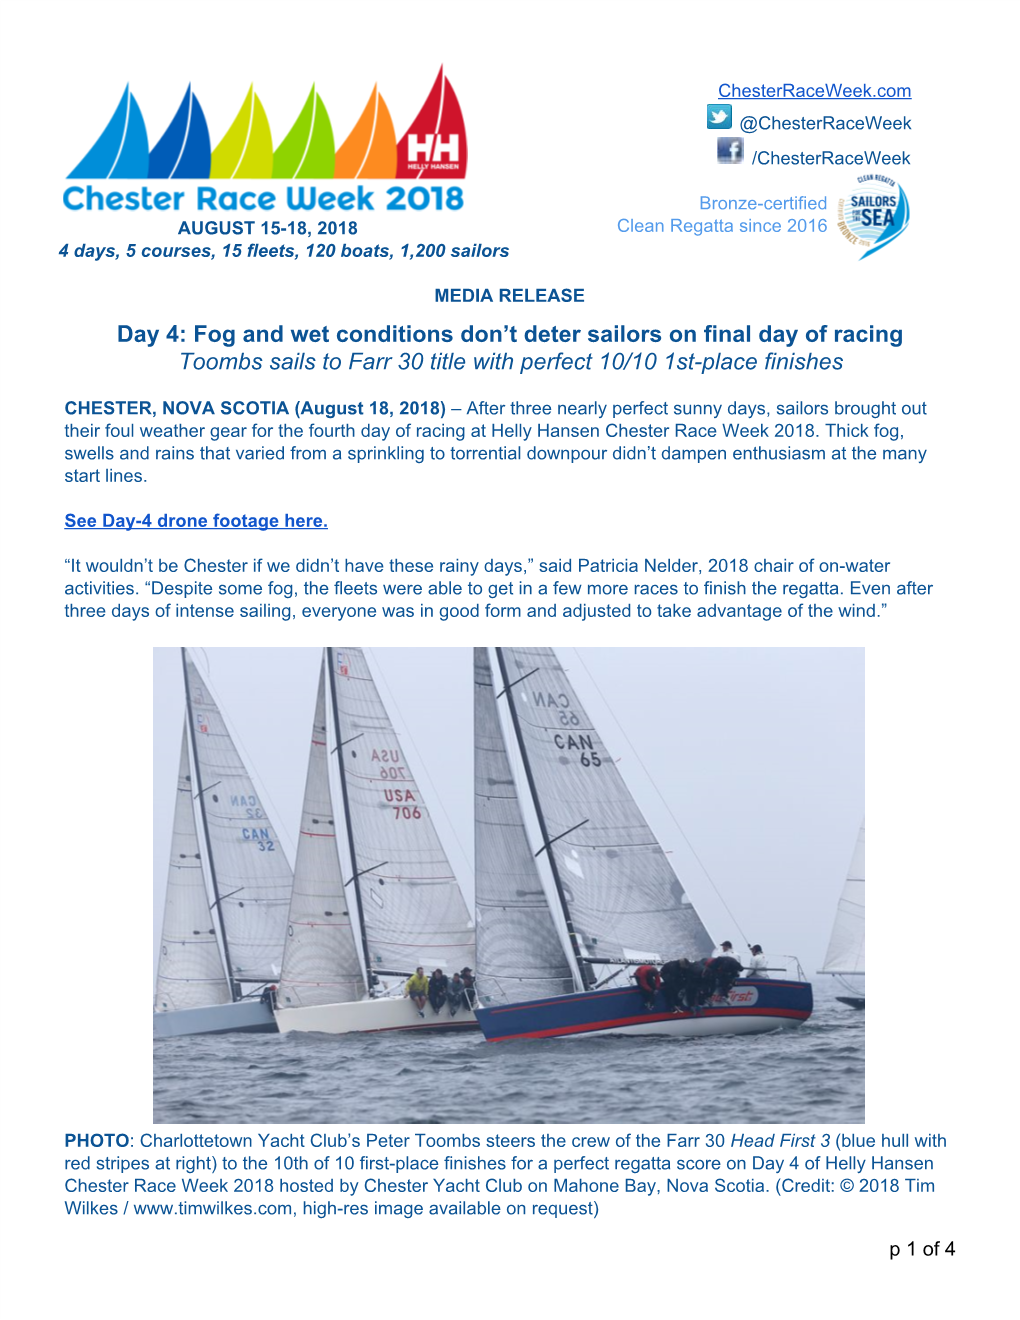 Day 4: Fog and Wet Conditions Don't Deter Sailors